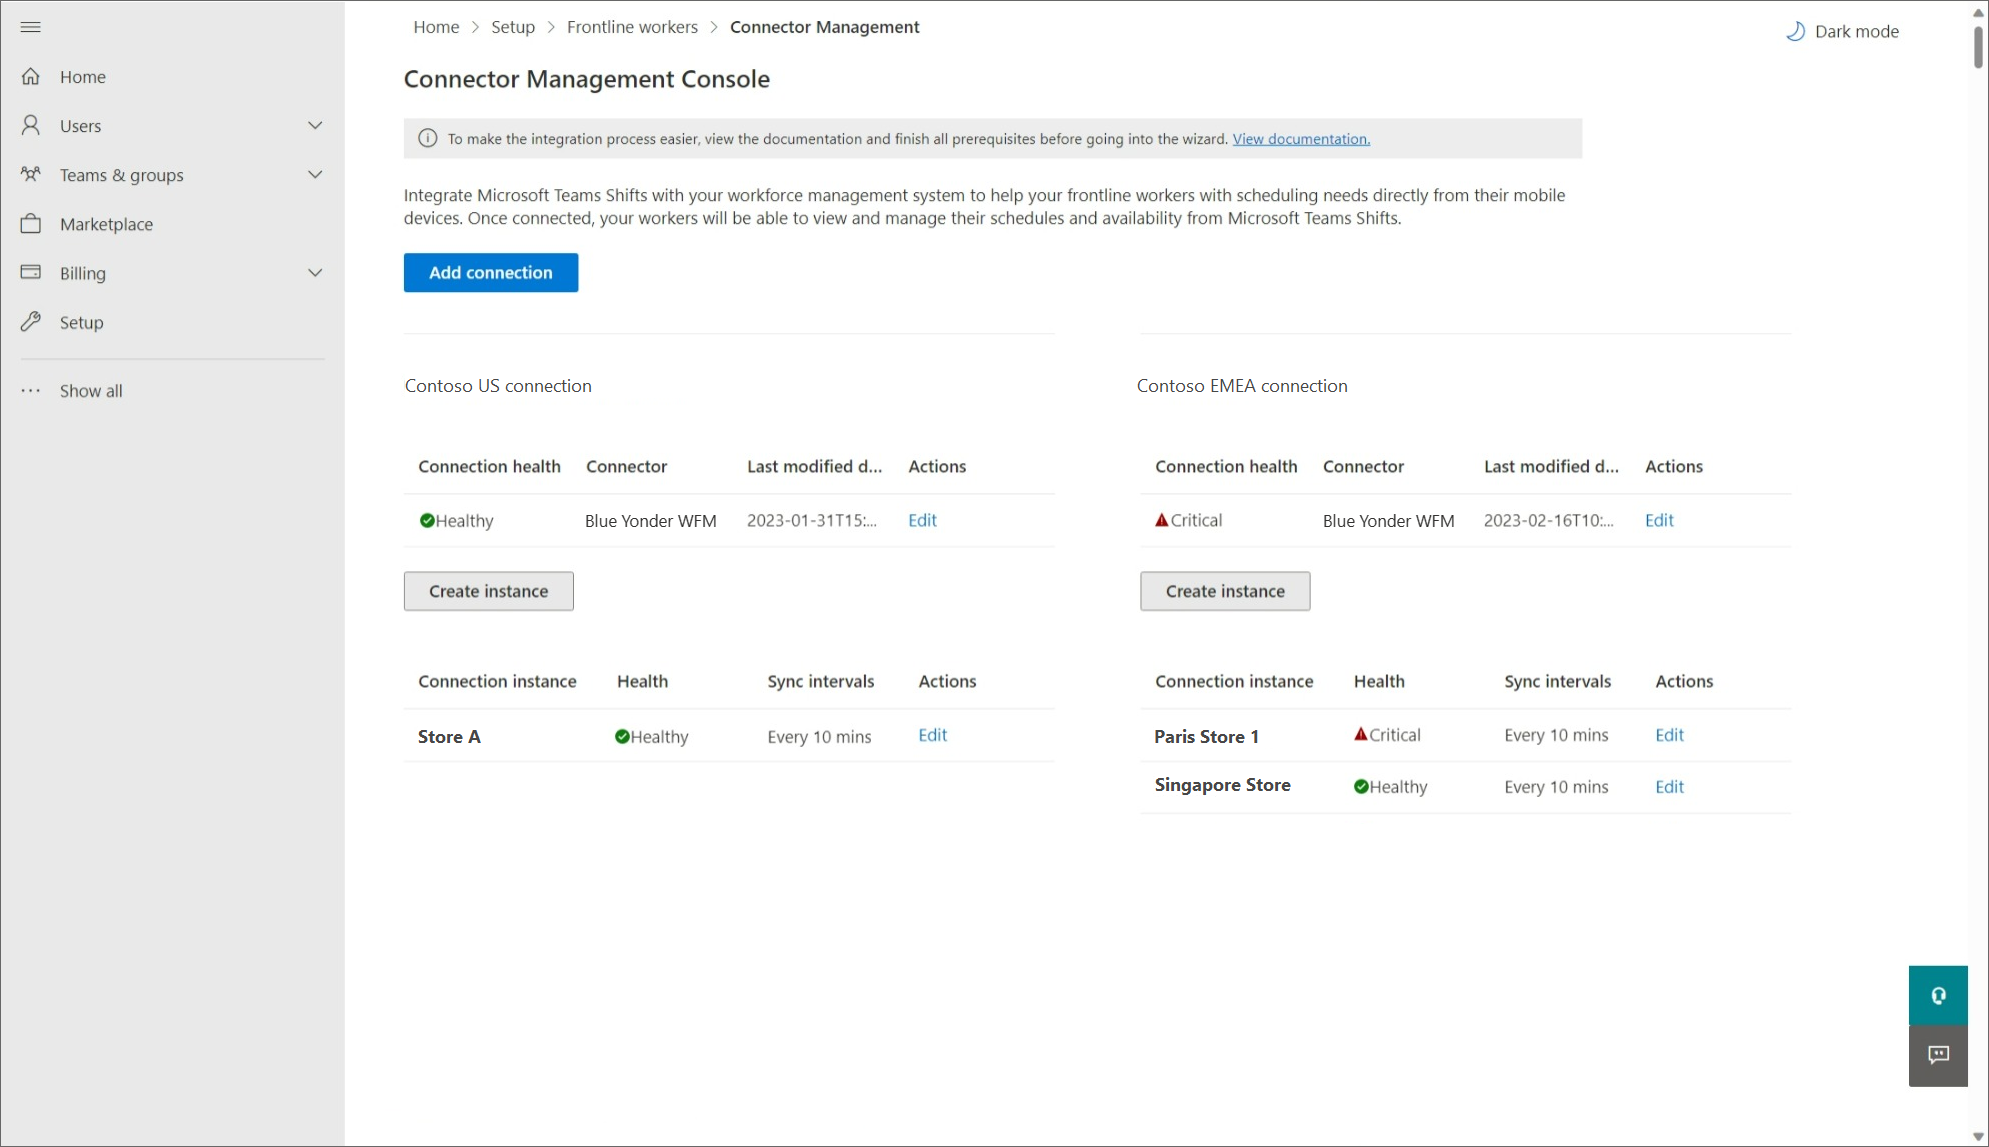 Screenshot of the Connector Management page in the Microsoft 365 admin center, showing a list of connections.